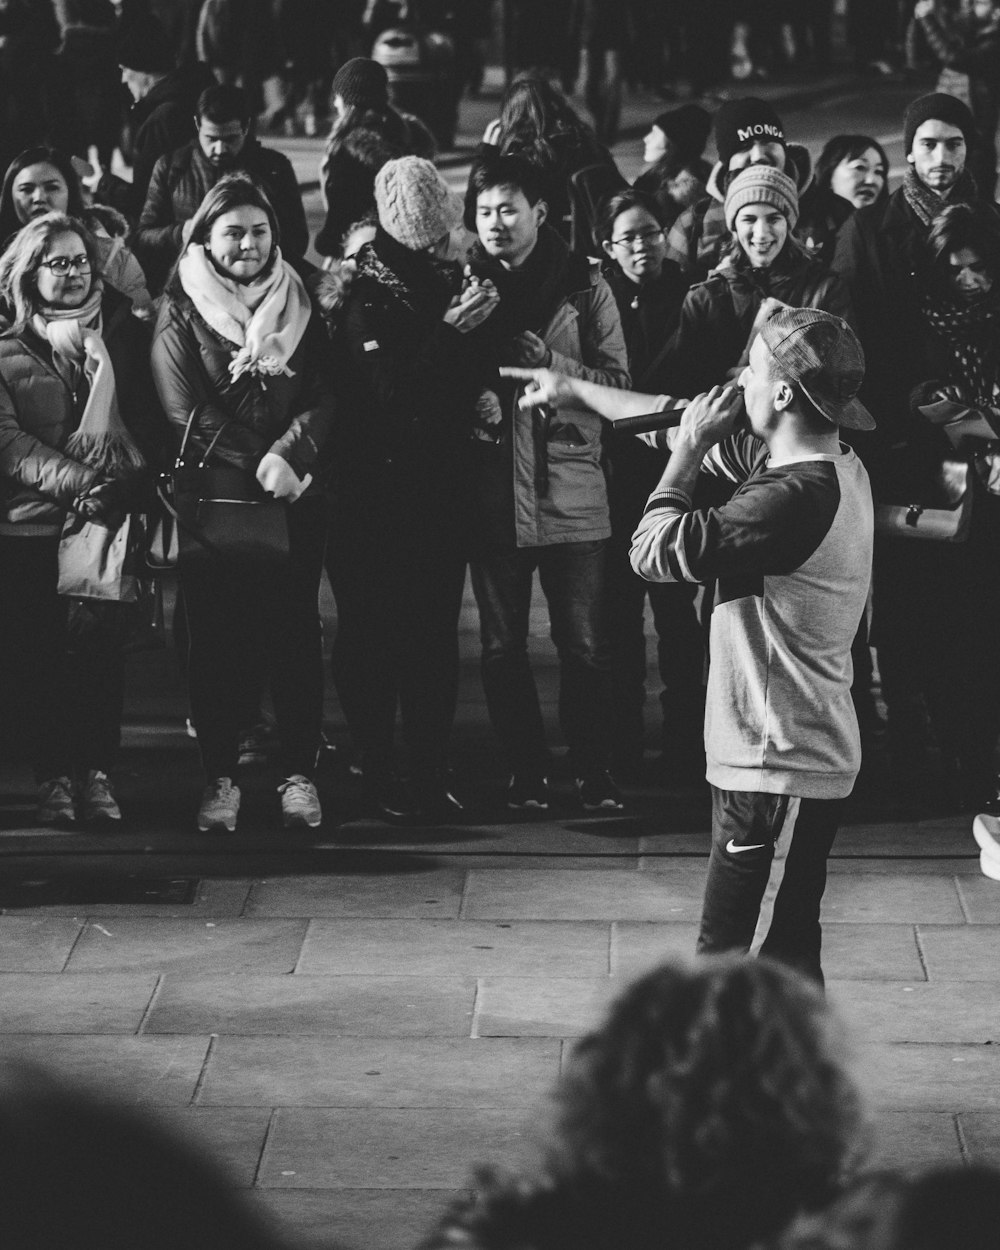 gray scale photo of man performing in front of people on street